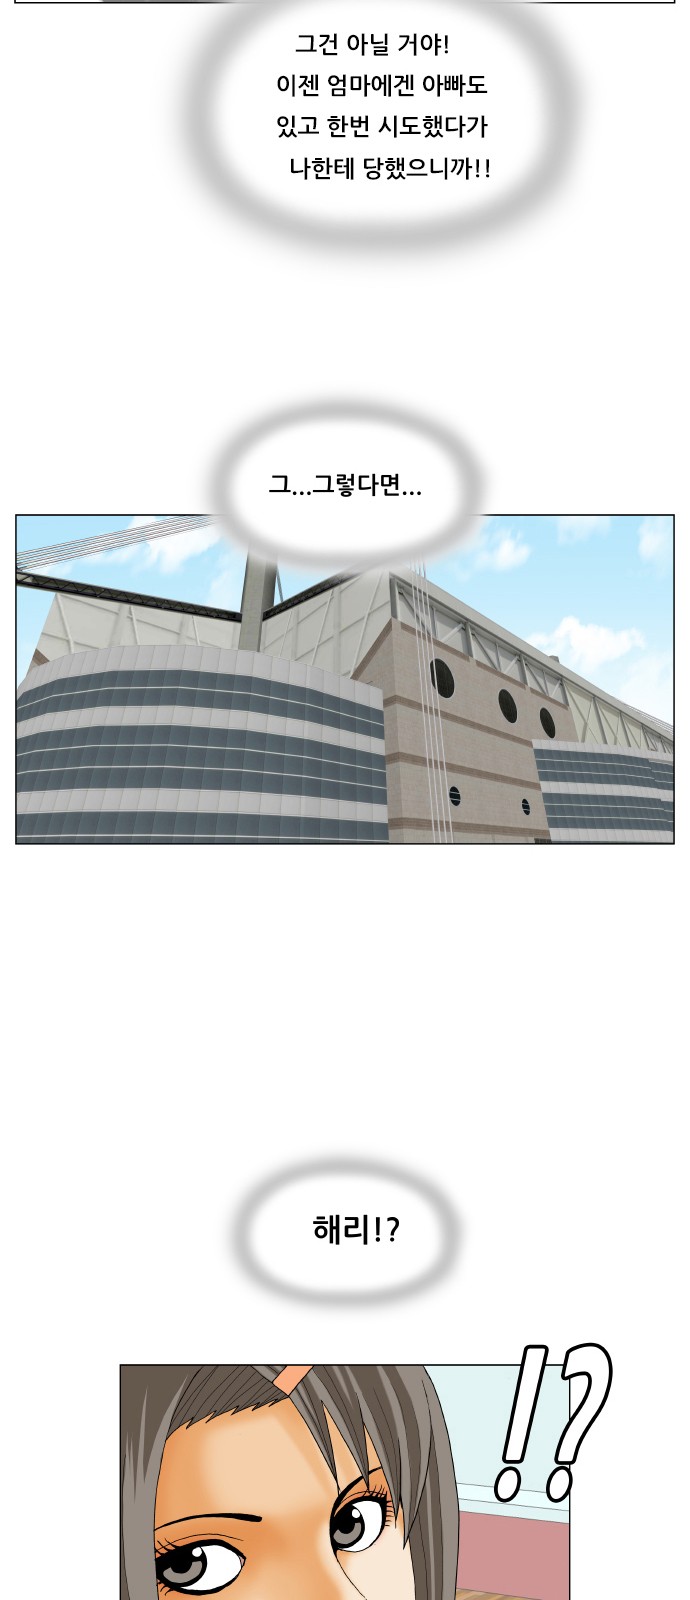 Ultimate Legend - Kang Hae Hyo - Chapter 294 - Page 2